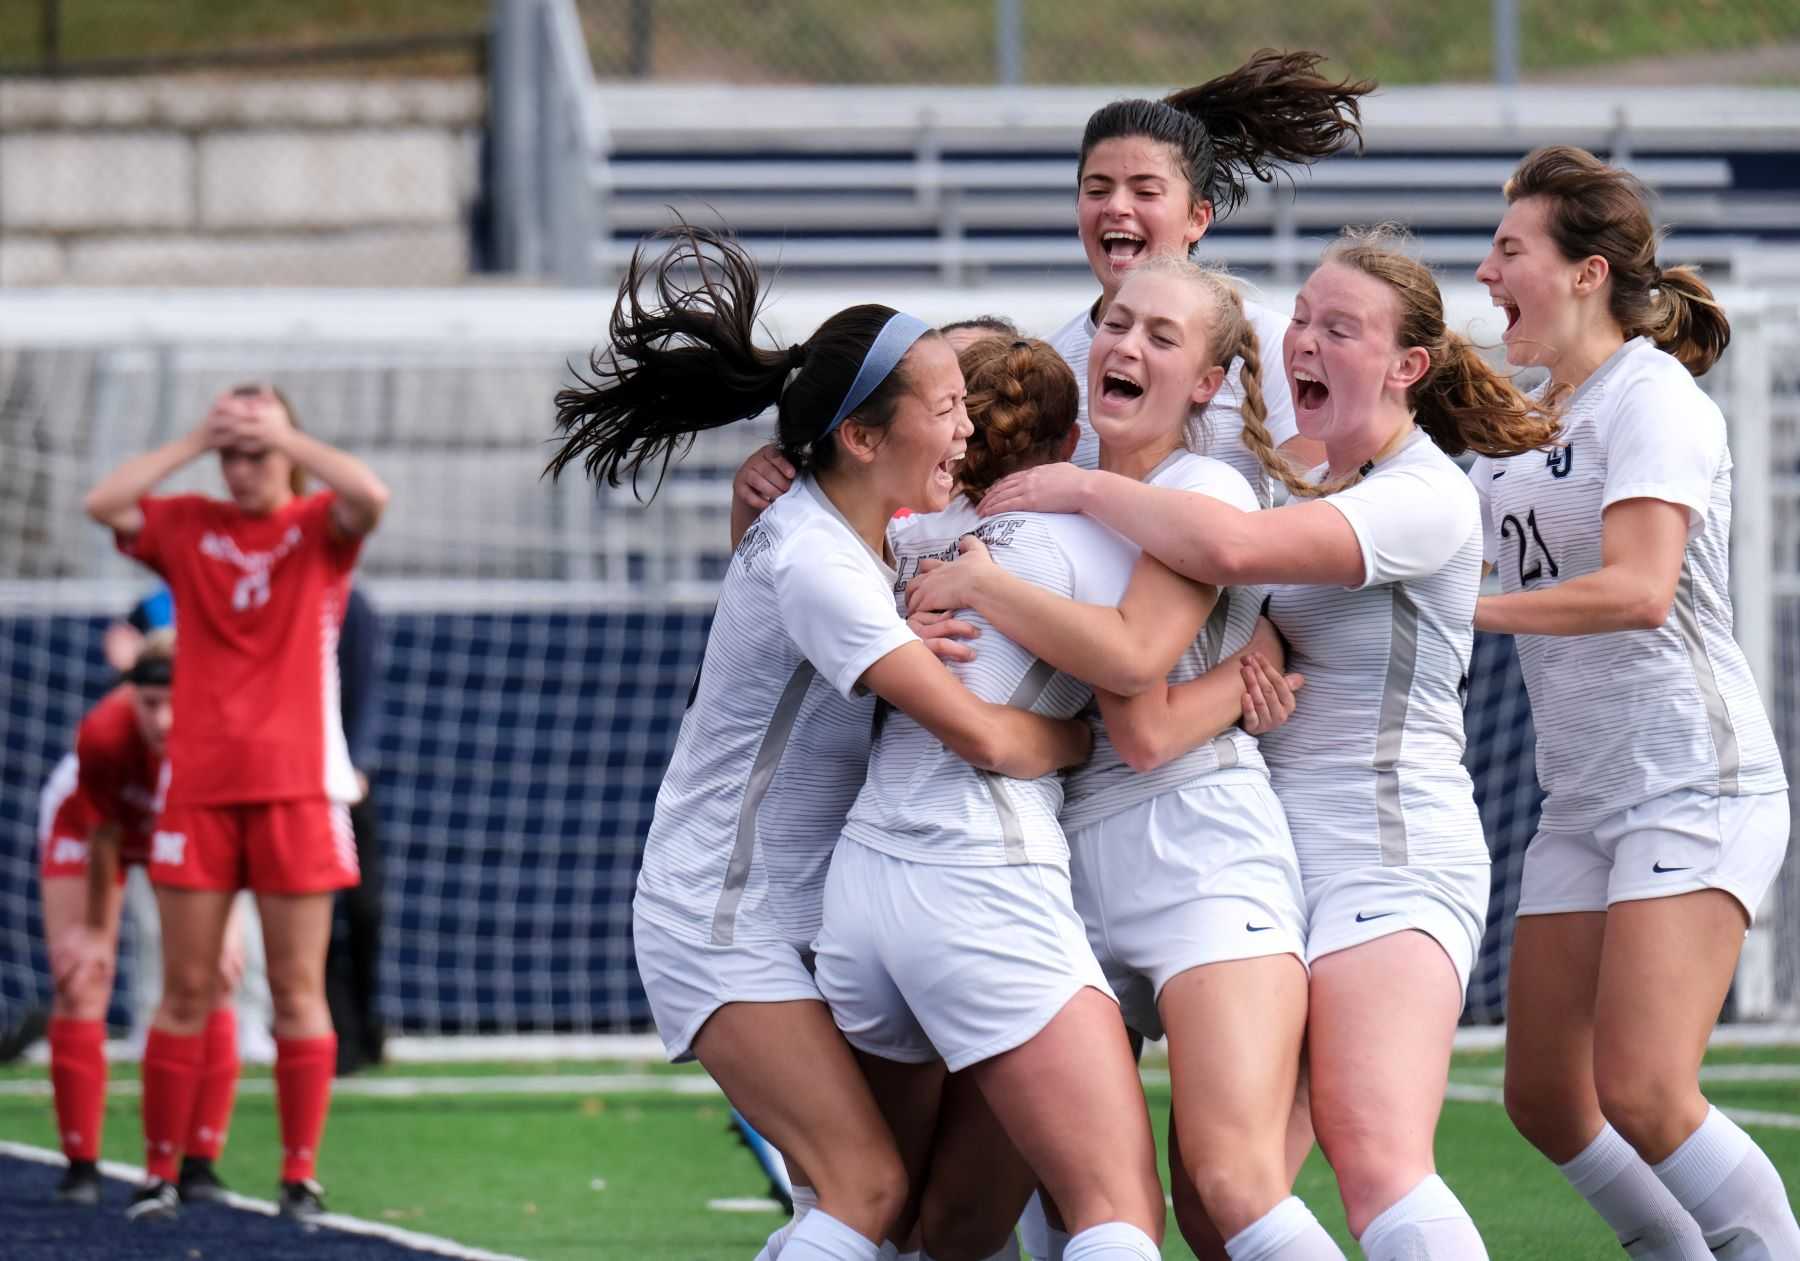 Members of the Lawrence women's soccer team celebrate in the moments after a game-winning goal is scored while members of the opposing team show dejection in the background.